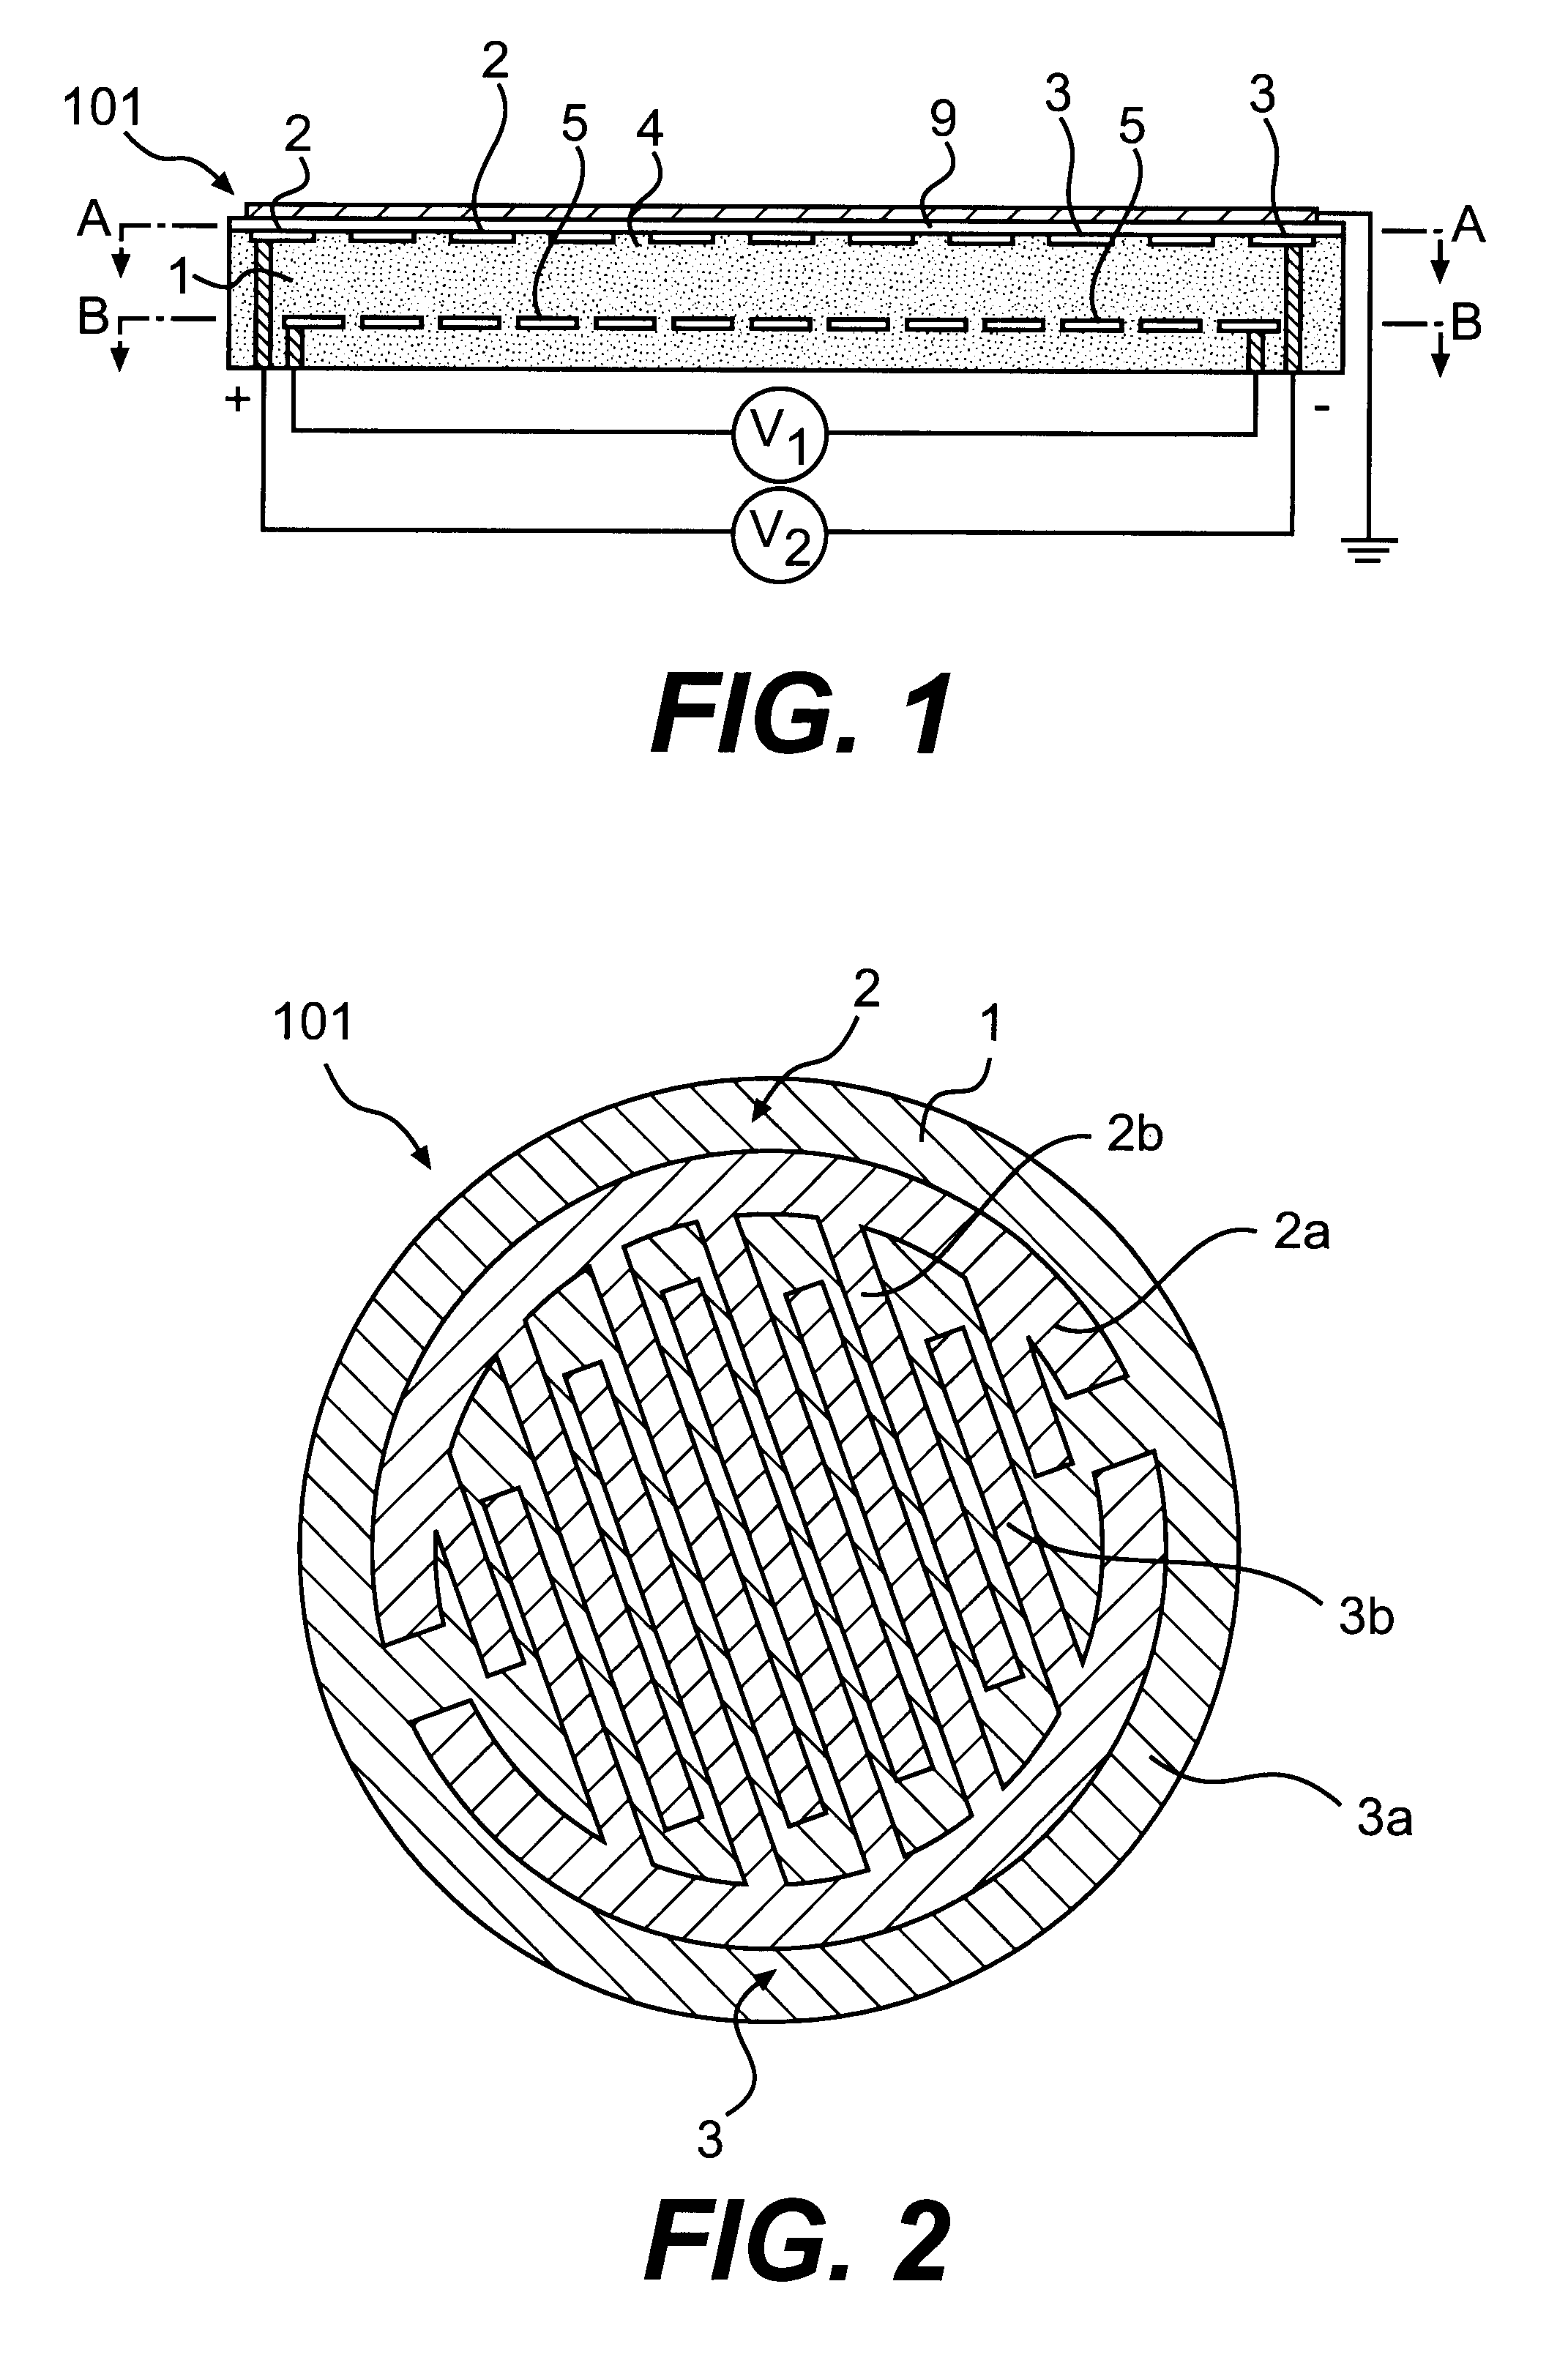 Ceramic board for apparatuses for semiconductor manufacture and inspection